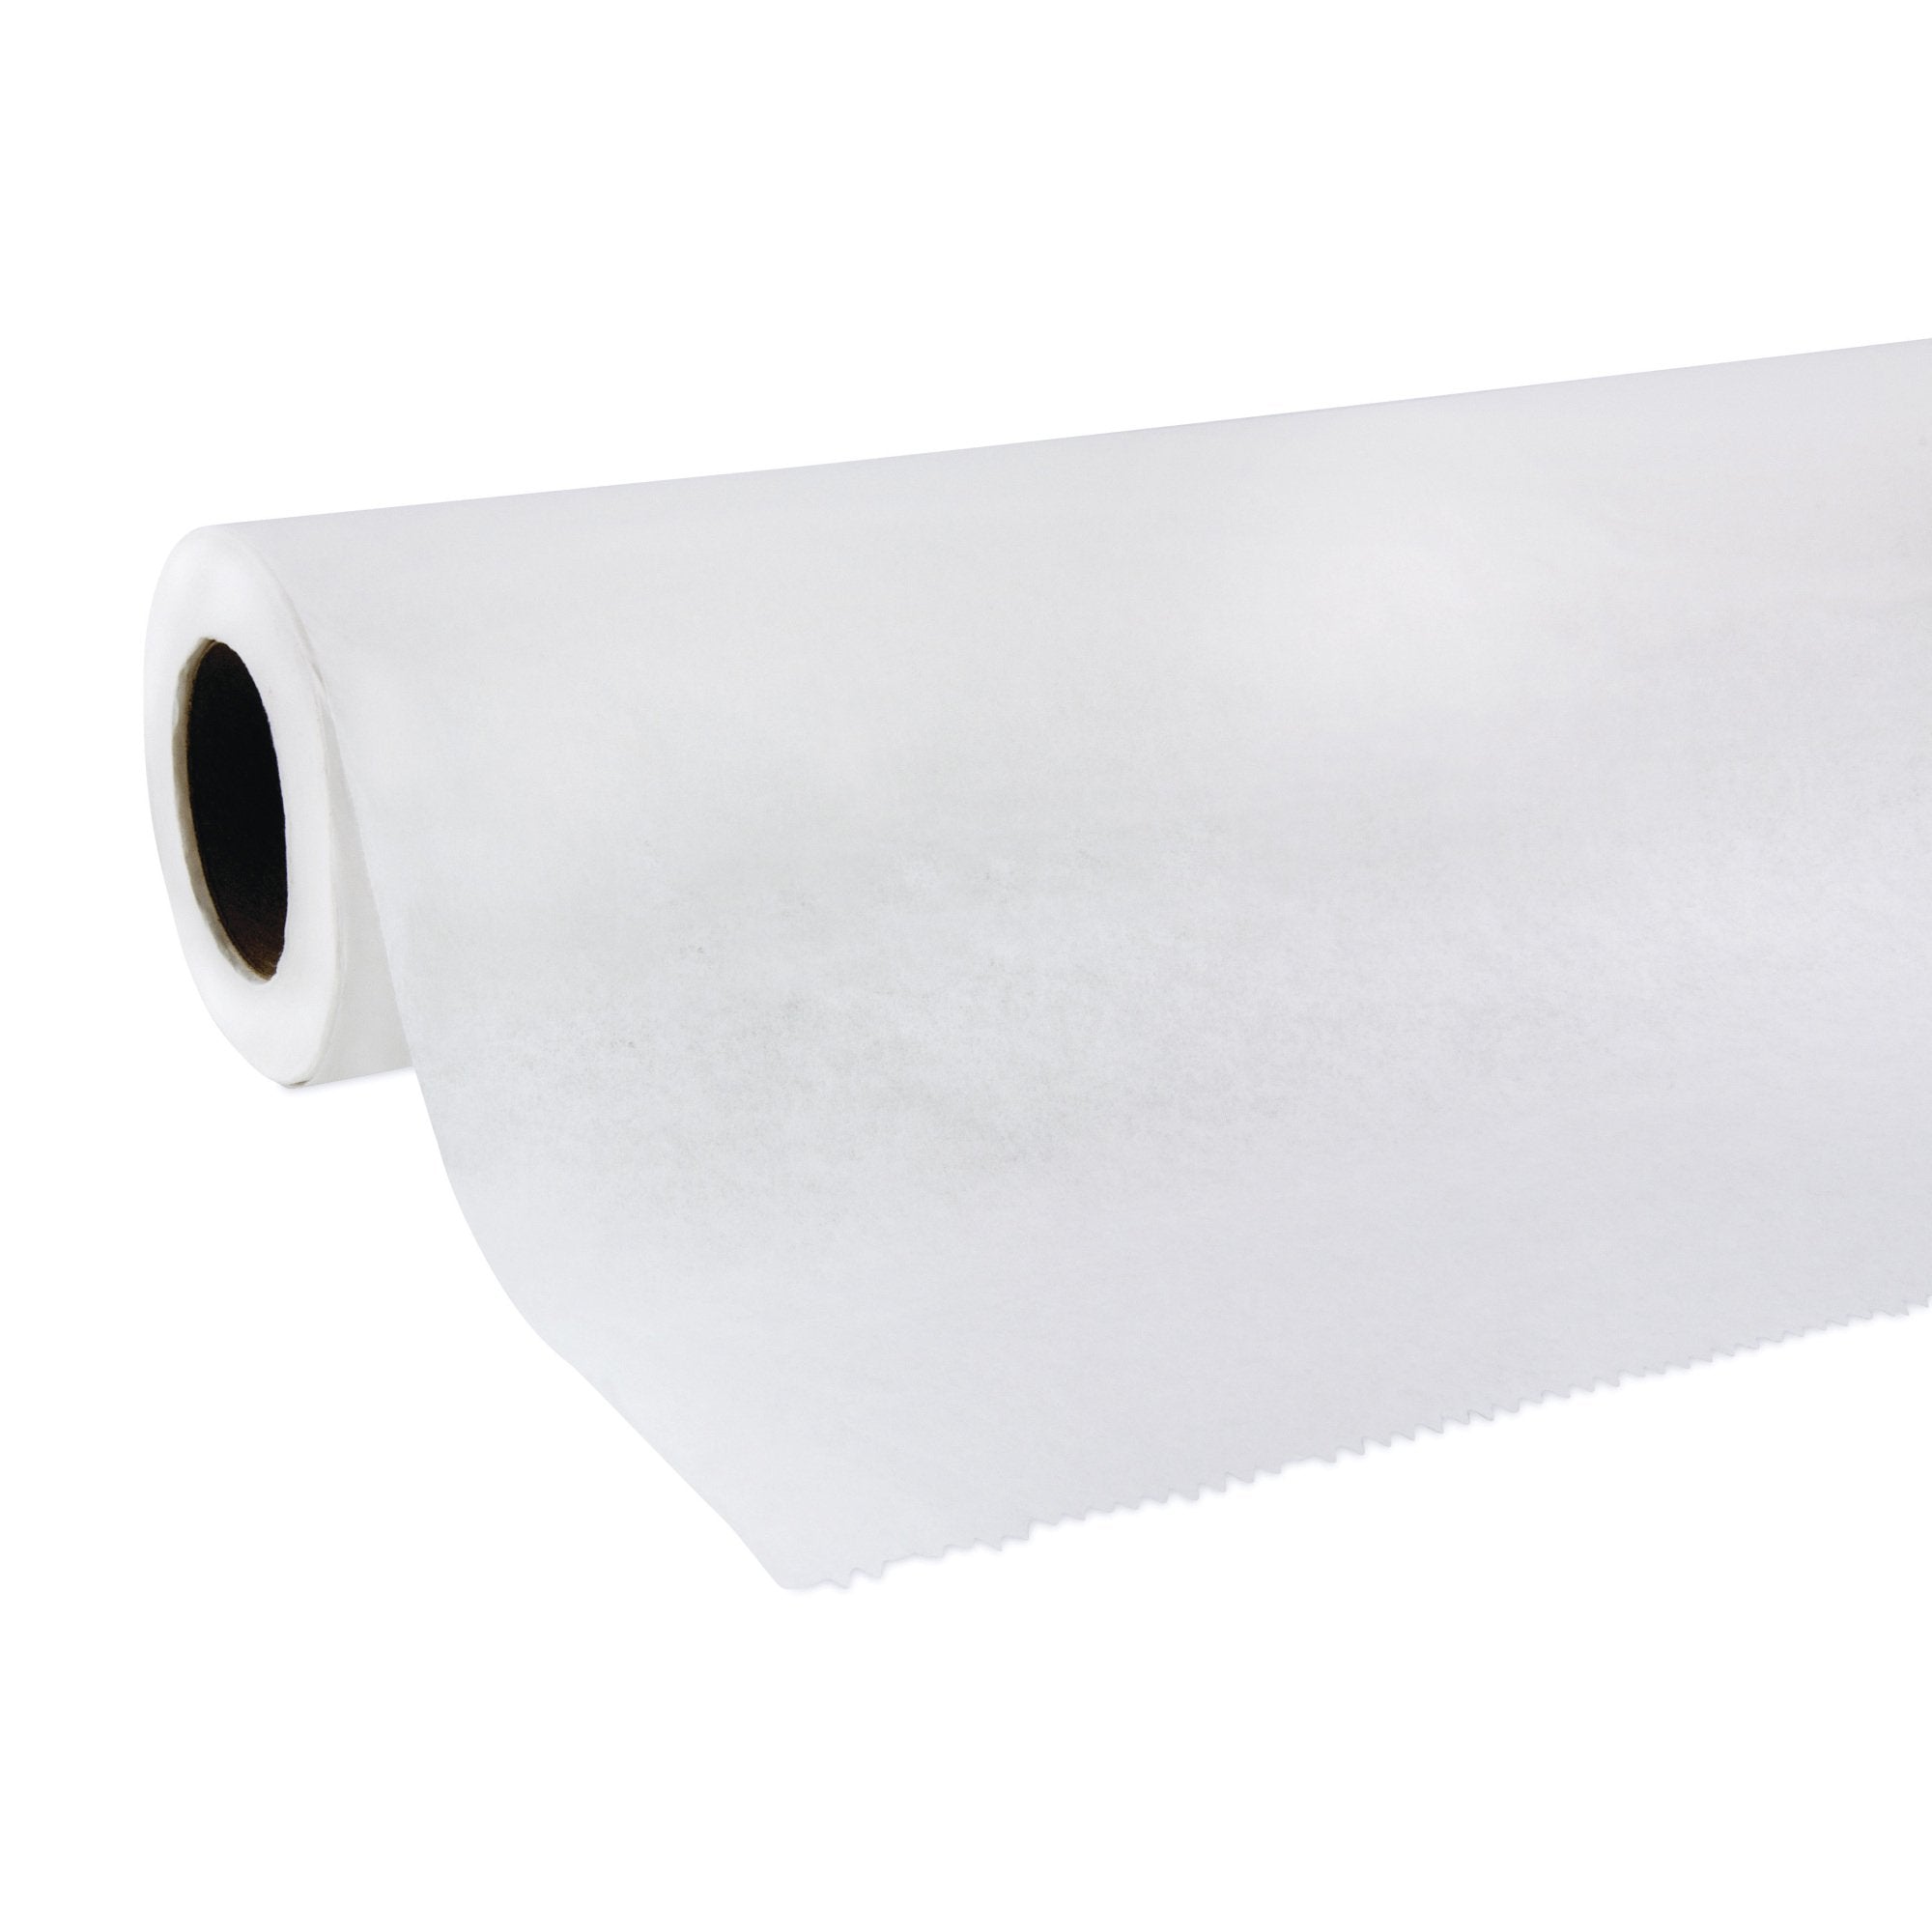 Exam Table Paper (21 inch width)